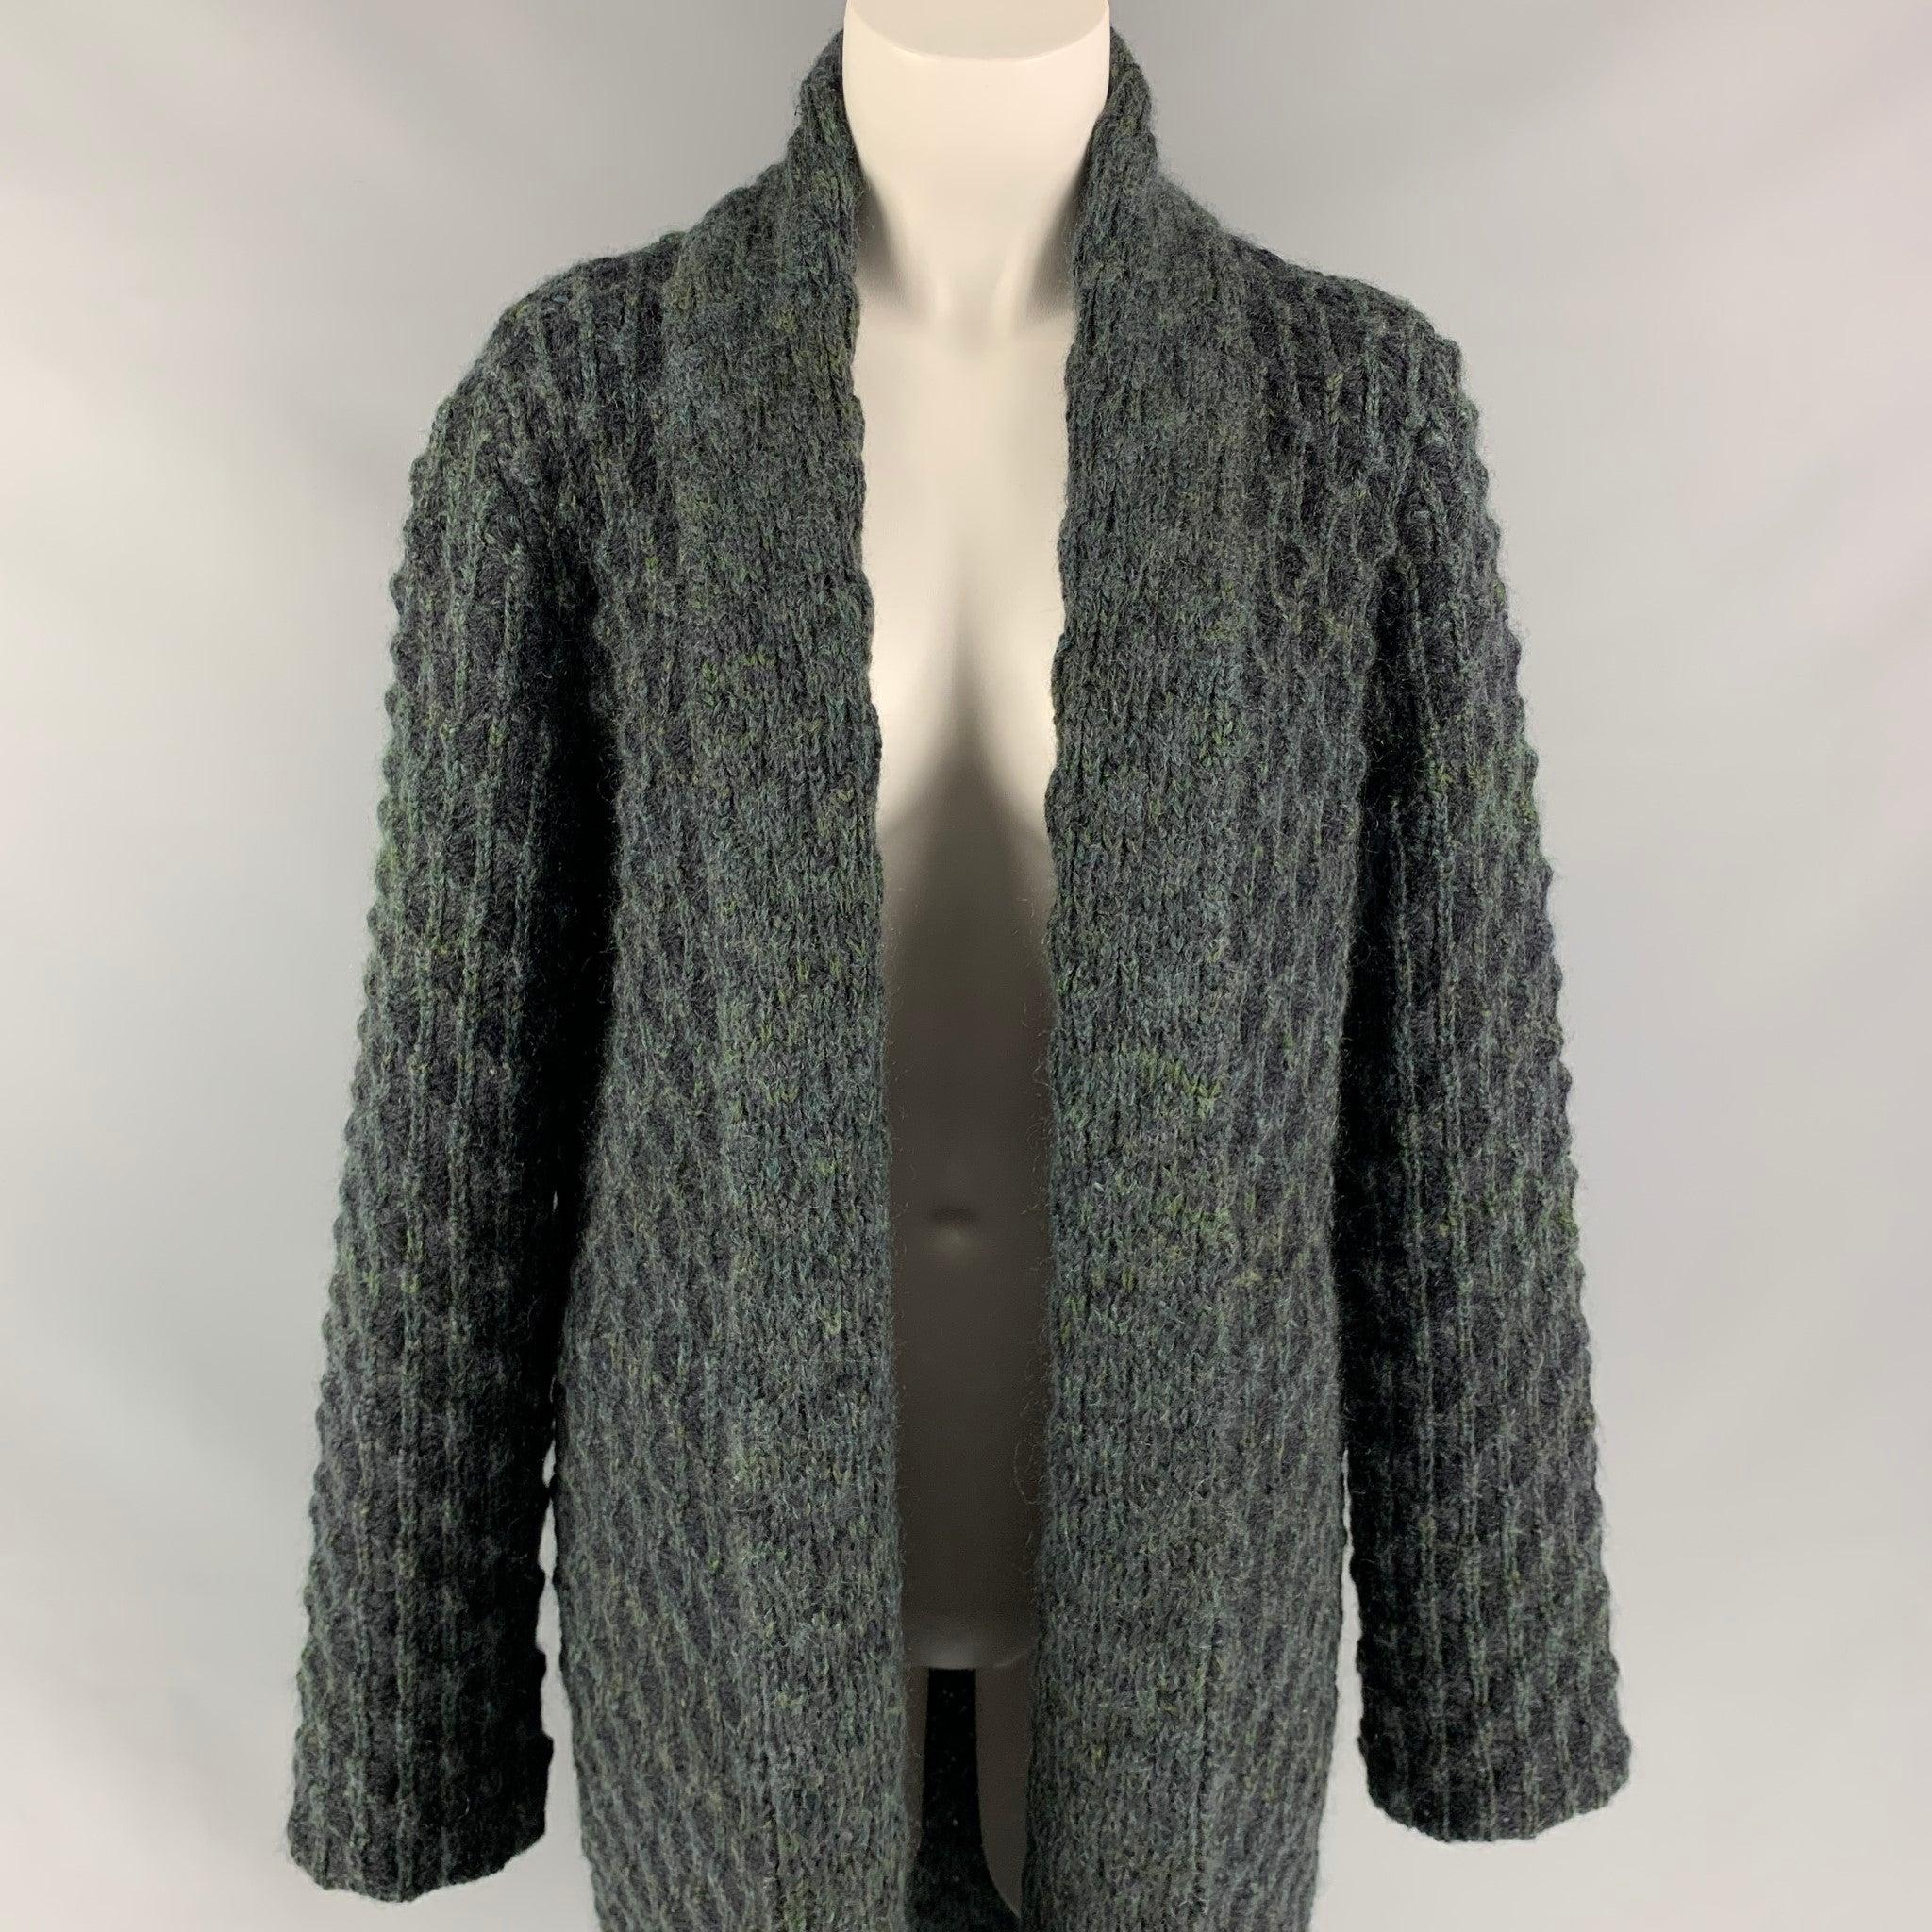 MISSONI coat comes in a charcoal & green knitted wool / mohair featuring a shawl collar, slit pockets, and a open front.
Very Good
Pre-Owned Condition. 

Marked:  42 

Measurements: 
 
Shoulder: 17.5 inches Bust: 40 inches Sleeve: 27 inches Length: